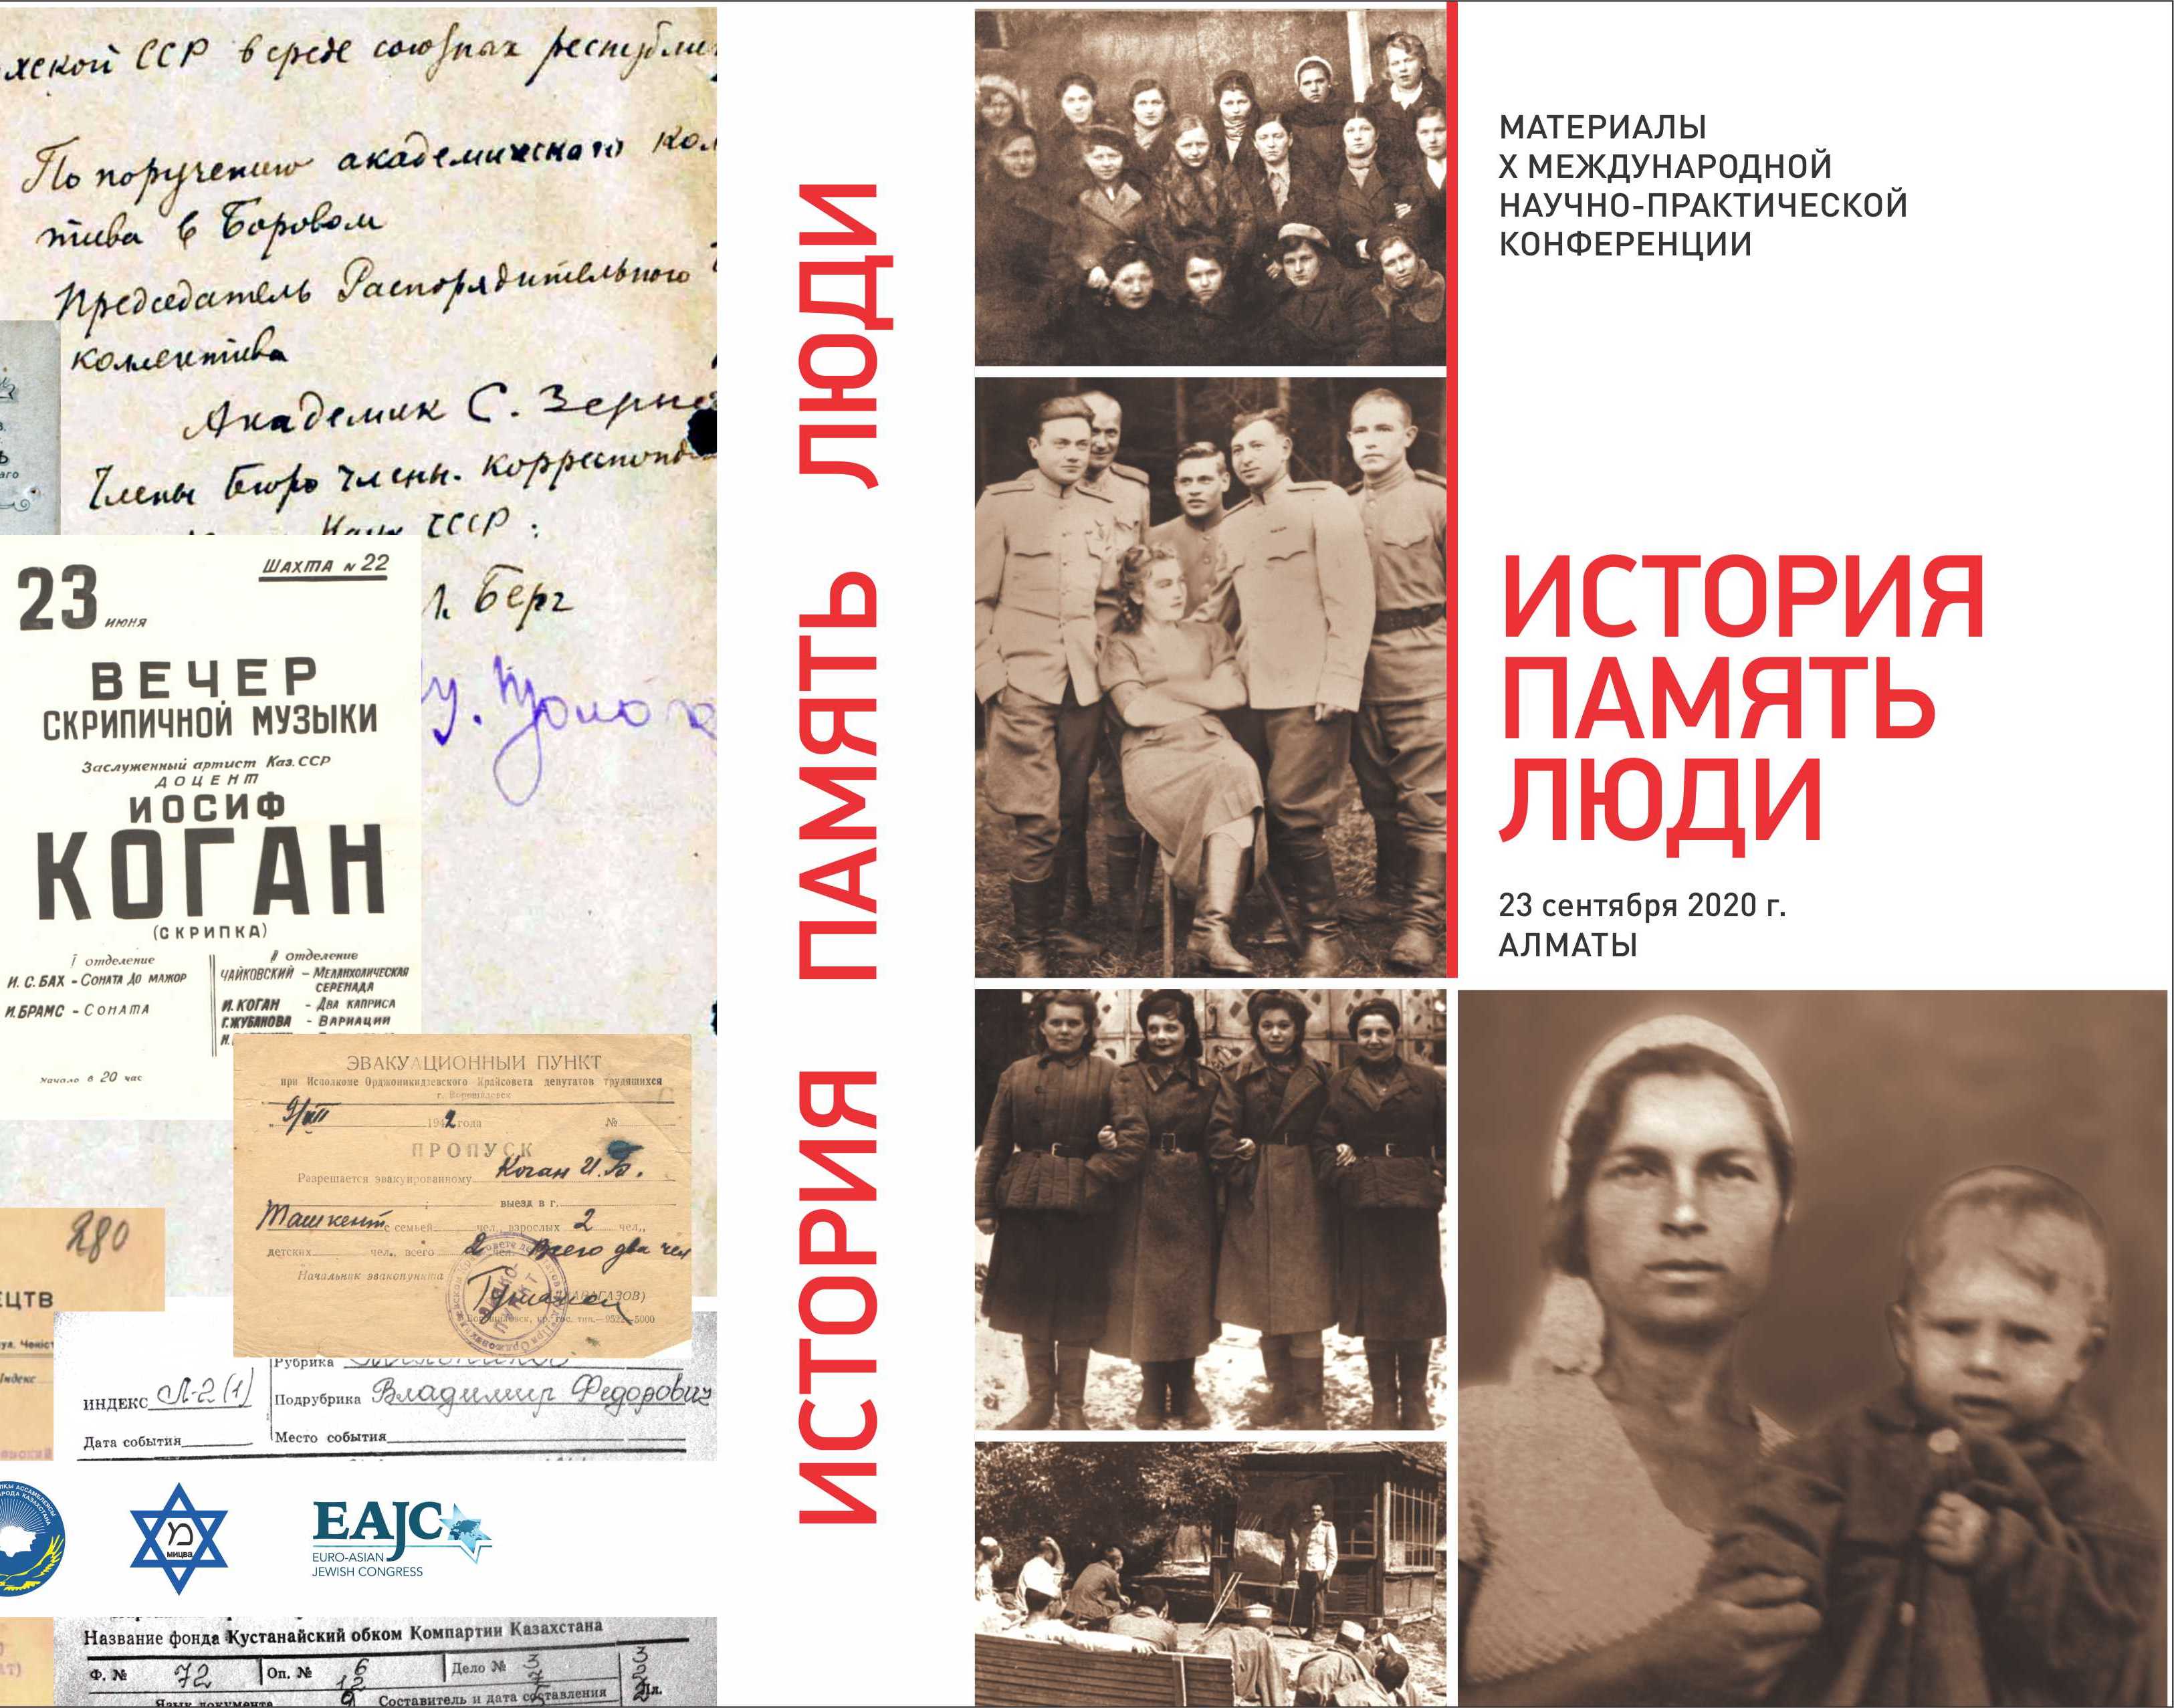 Materials of the X International Scientific and Practical Conference “History. Memory. People". Almaty, September 23, 2020